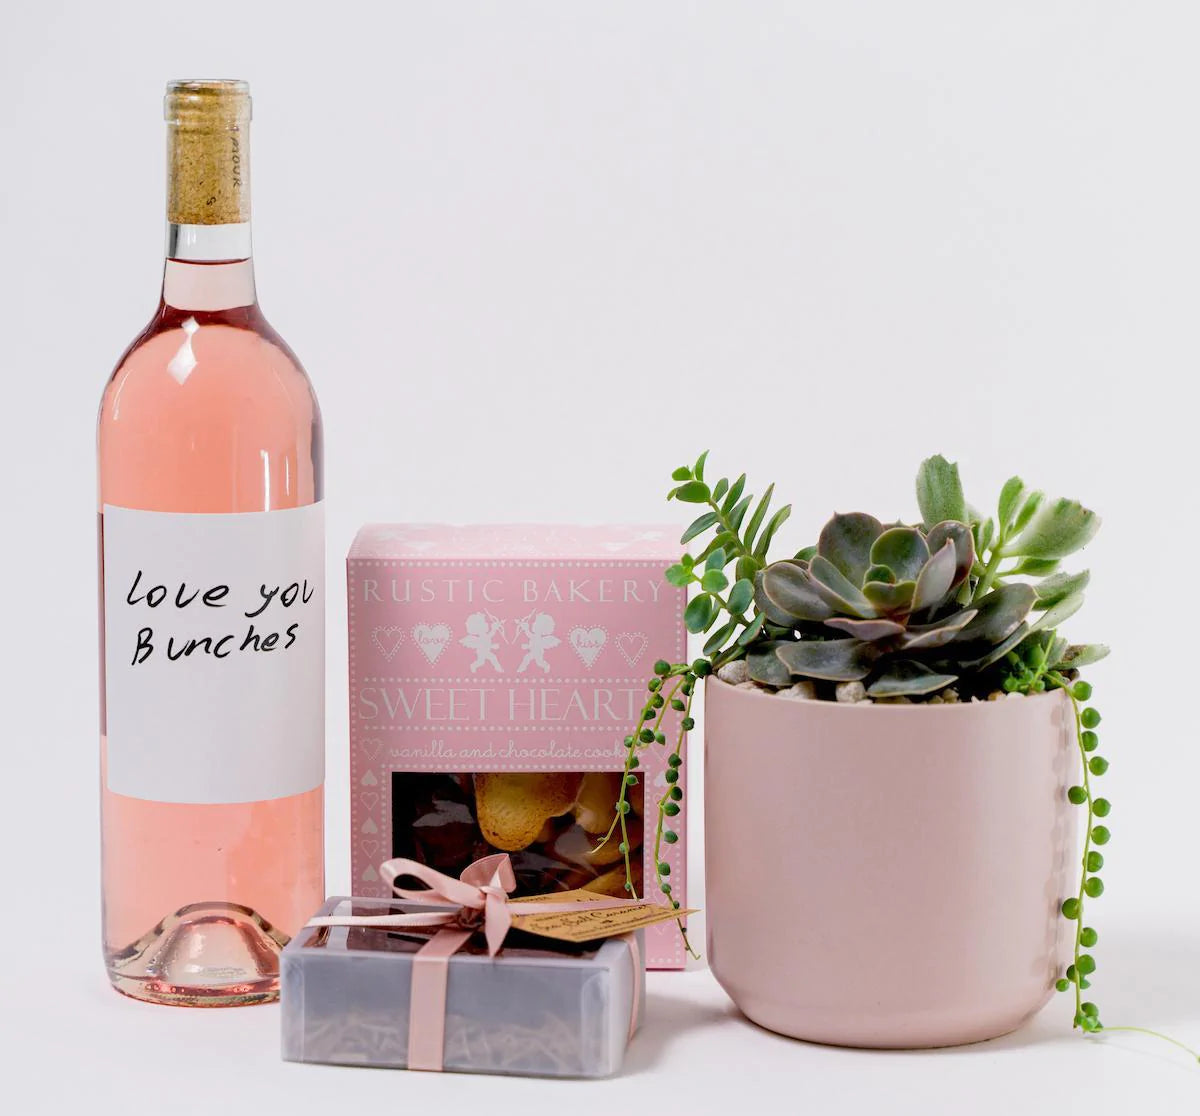 Love you bunches gift bundle with succulent